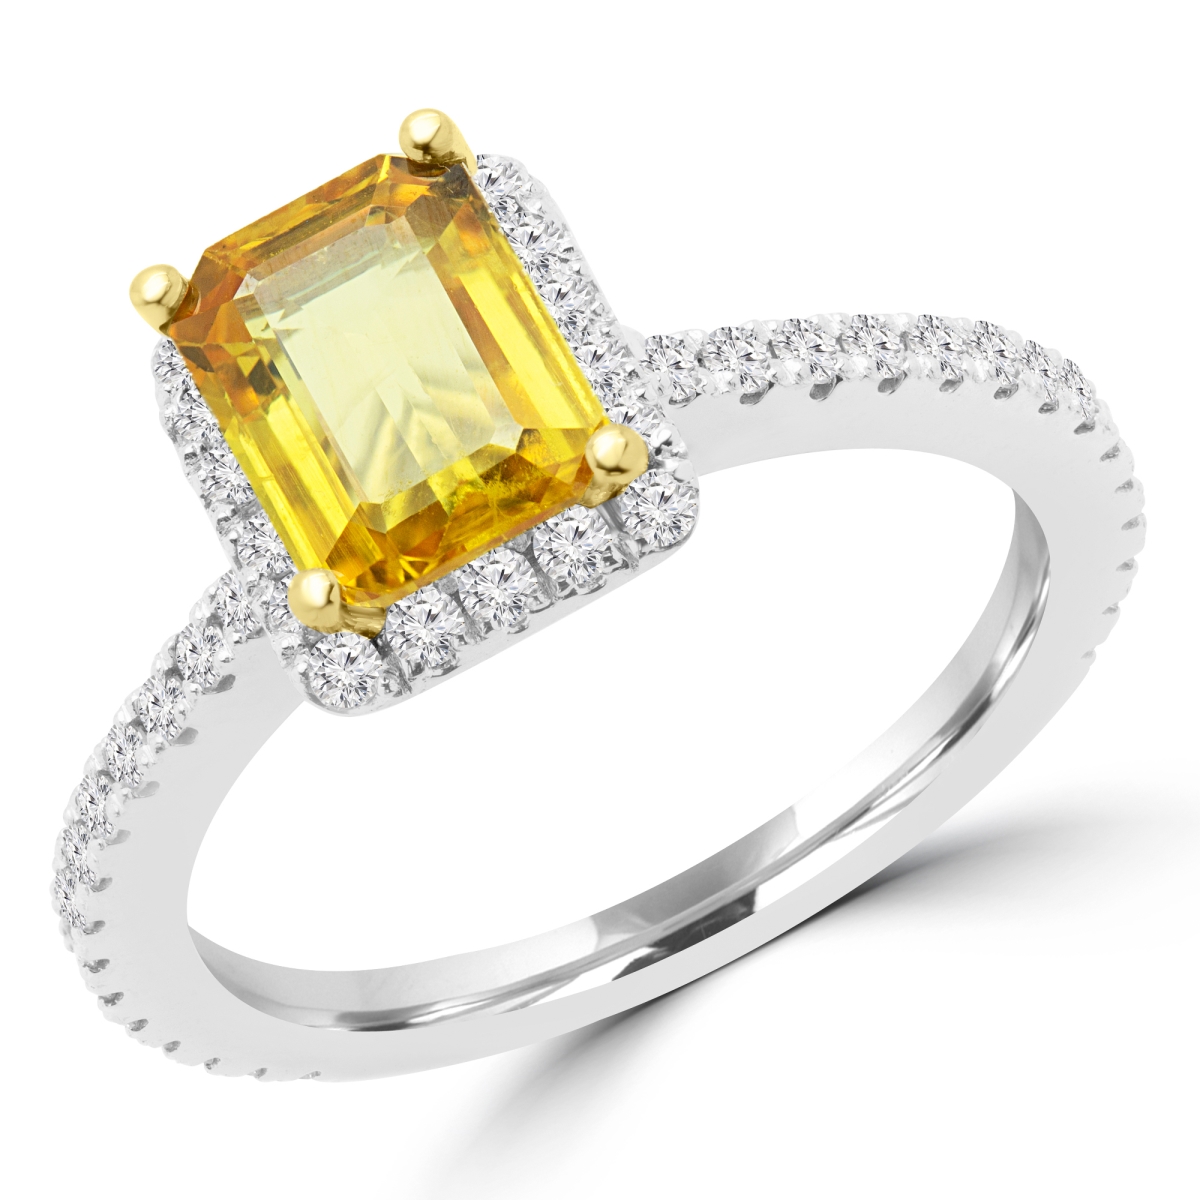 Picture of Majesty Diamonds MD170170-7.75 2.5 CTW Emerald Yellow Sapphire Halo Cocktail Ring in 14K White Gold - 7.75